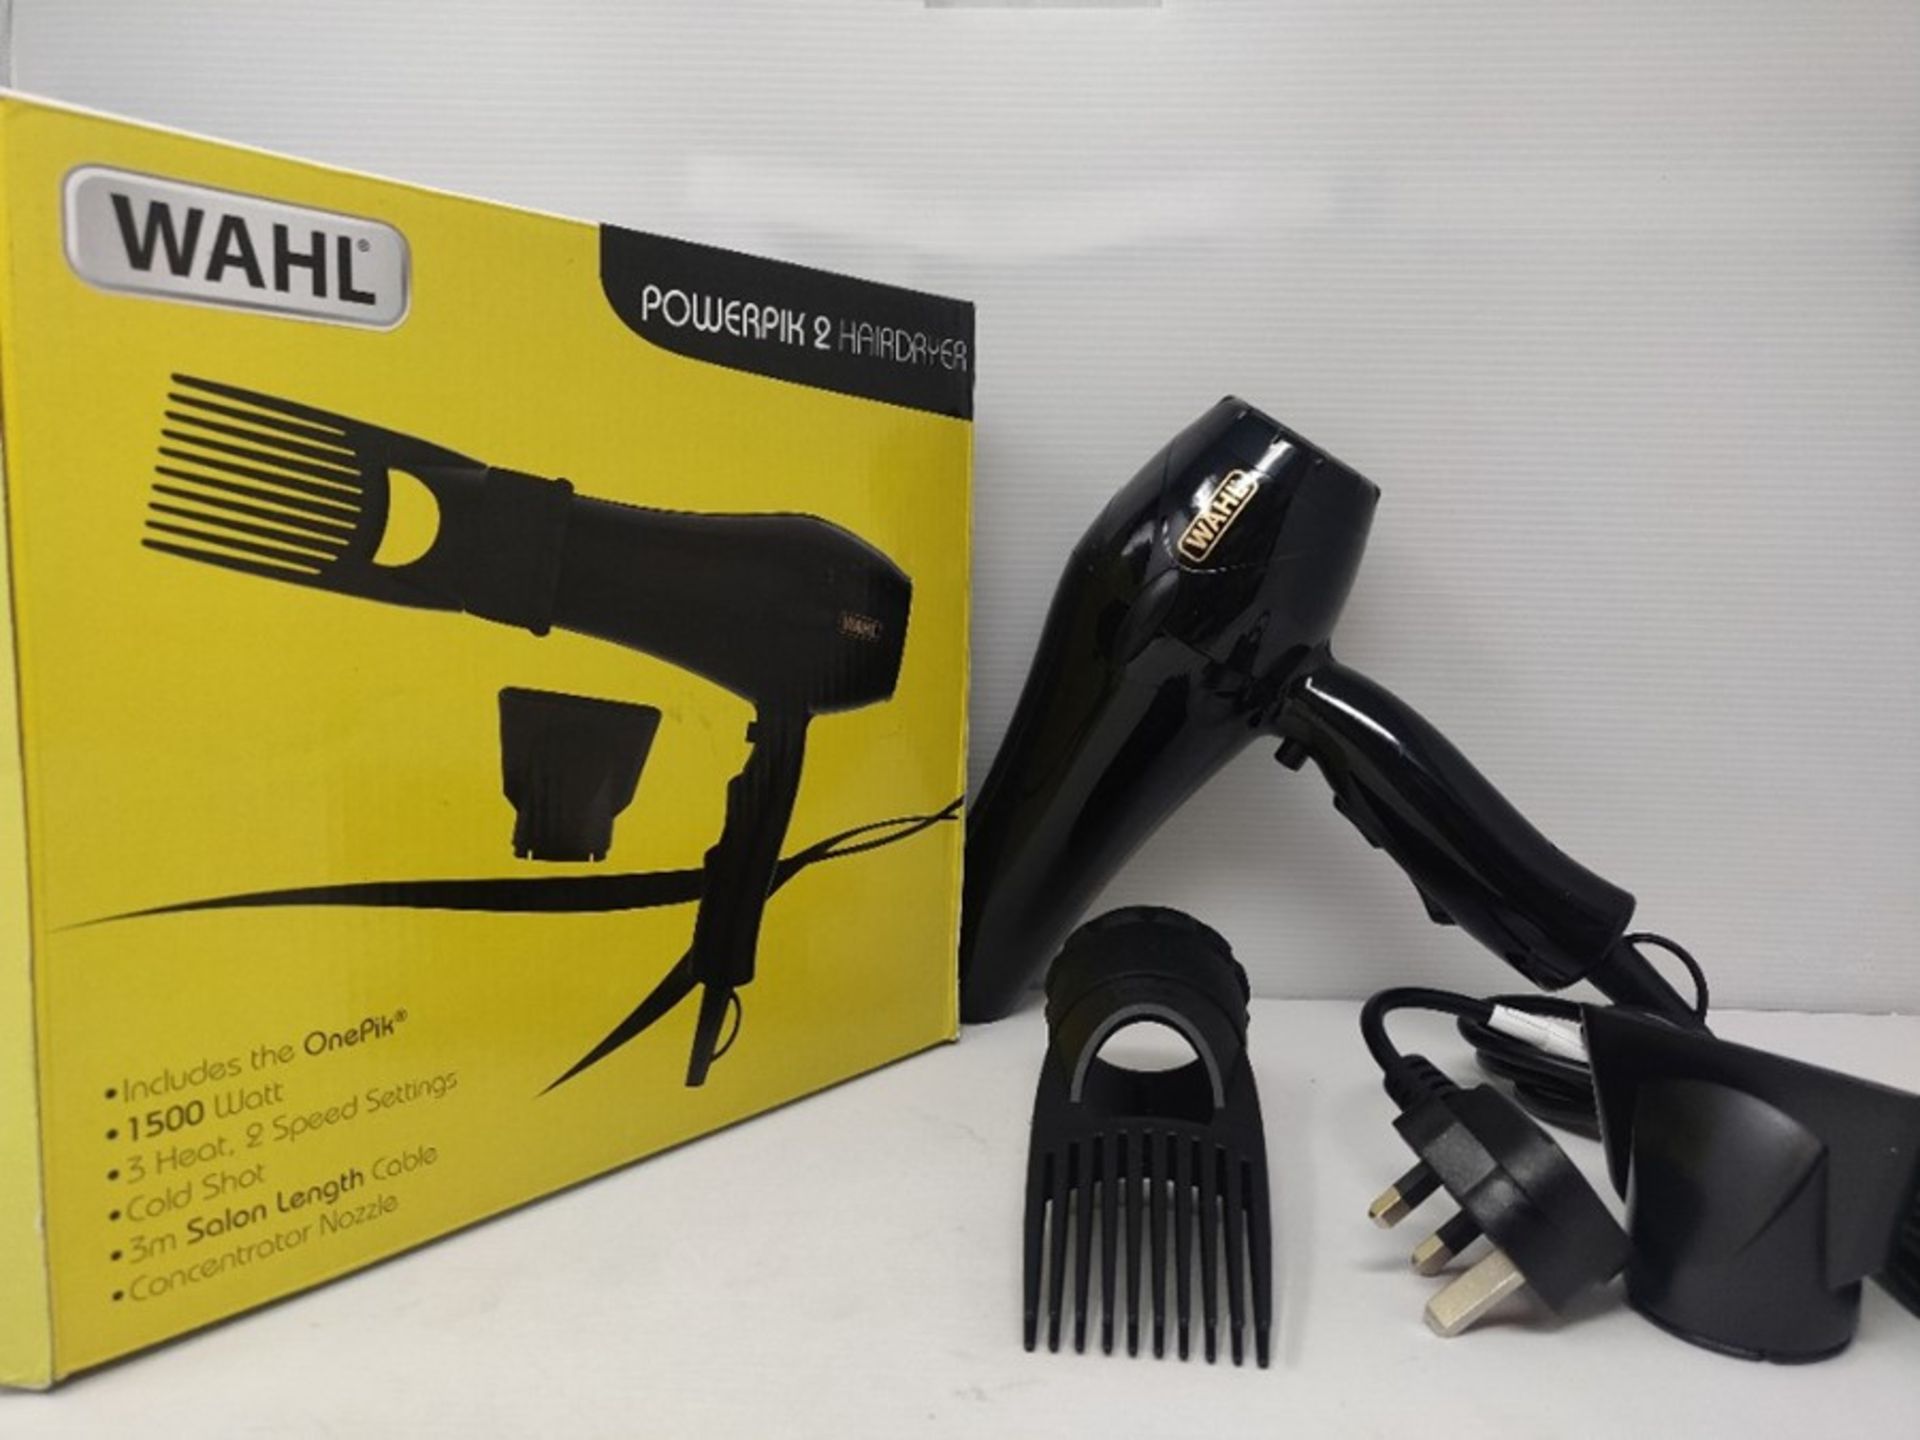 Wahl Hairdryers for Women Powerpik 2 Hair Dryer with Pik Attachment, Afro Hairdryer - Image 2 of 2